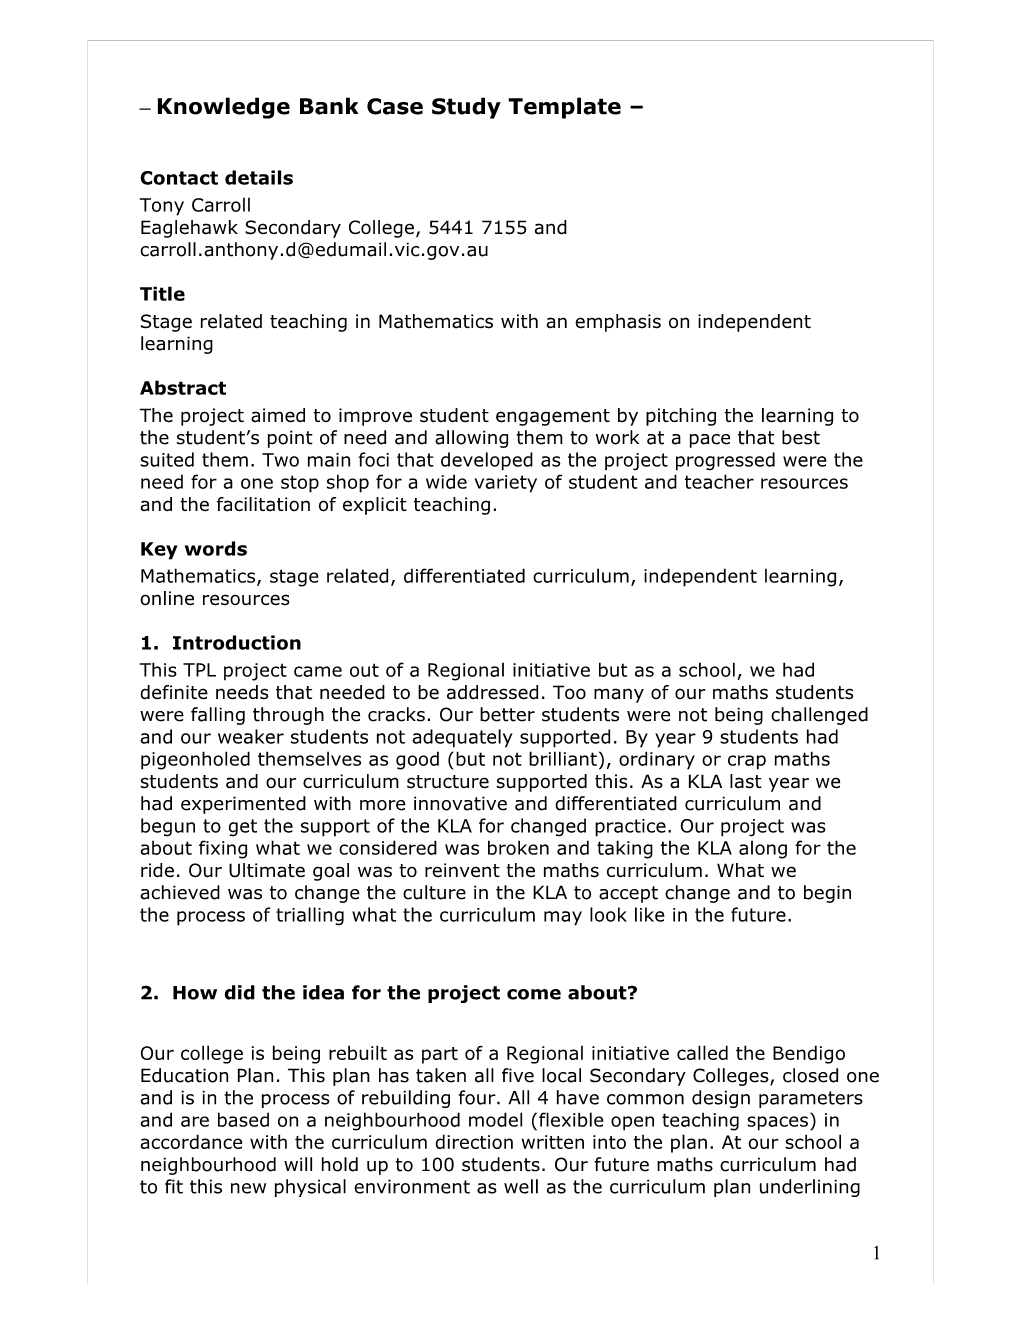 Teacher Professional Leave Knowledge Bank Template and Guidelines s1